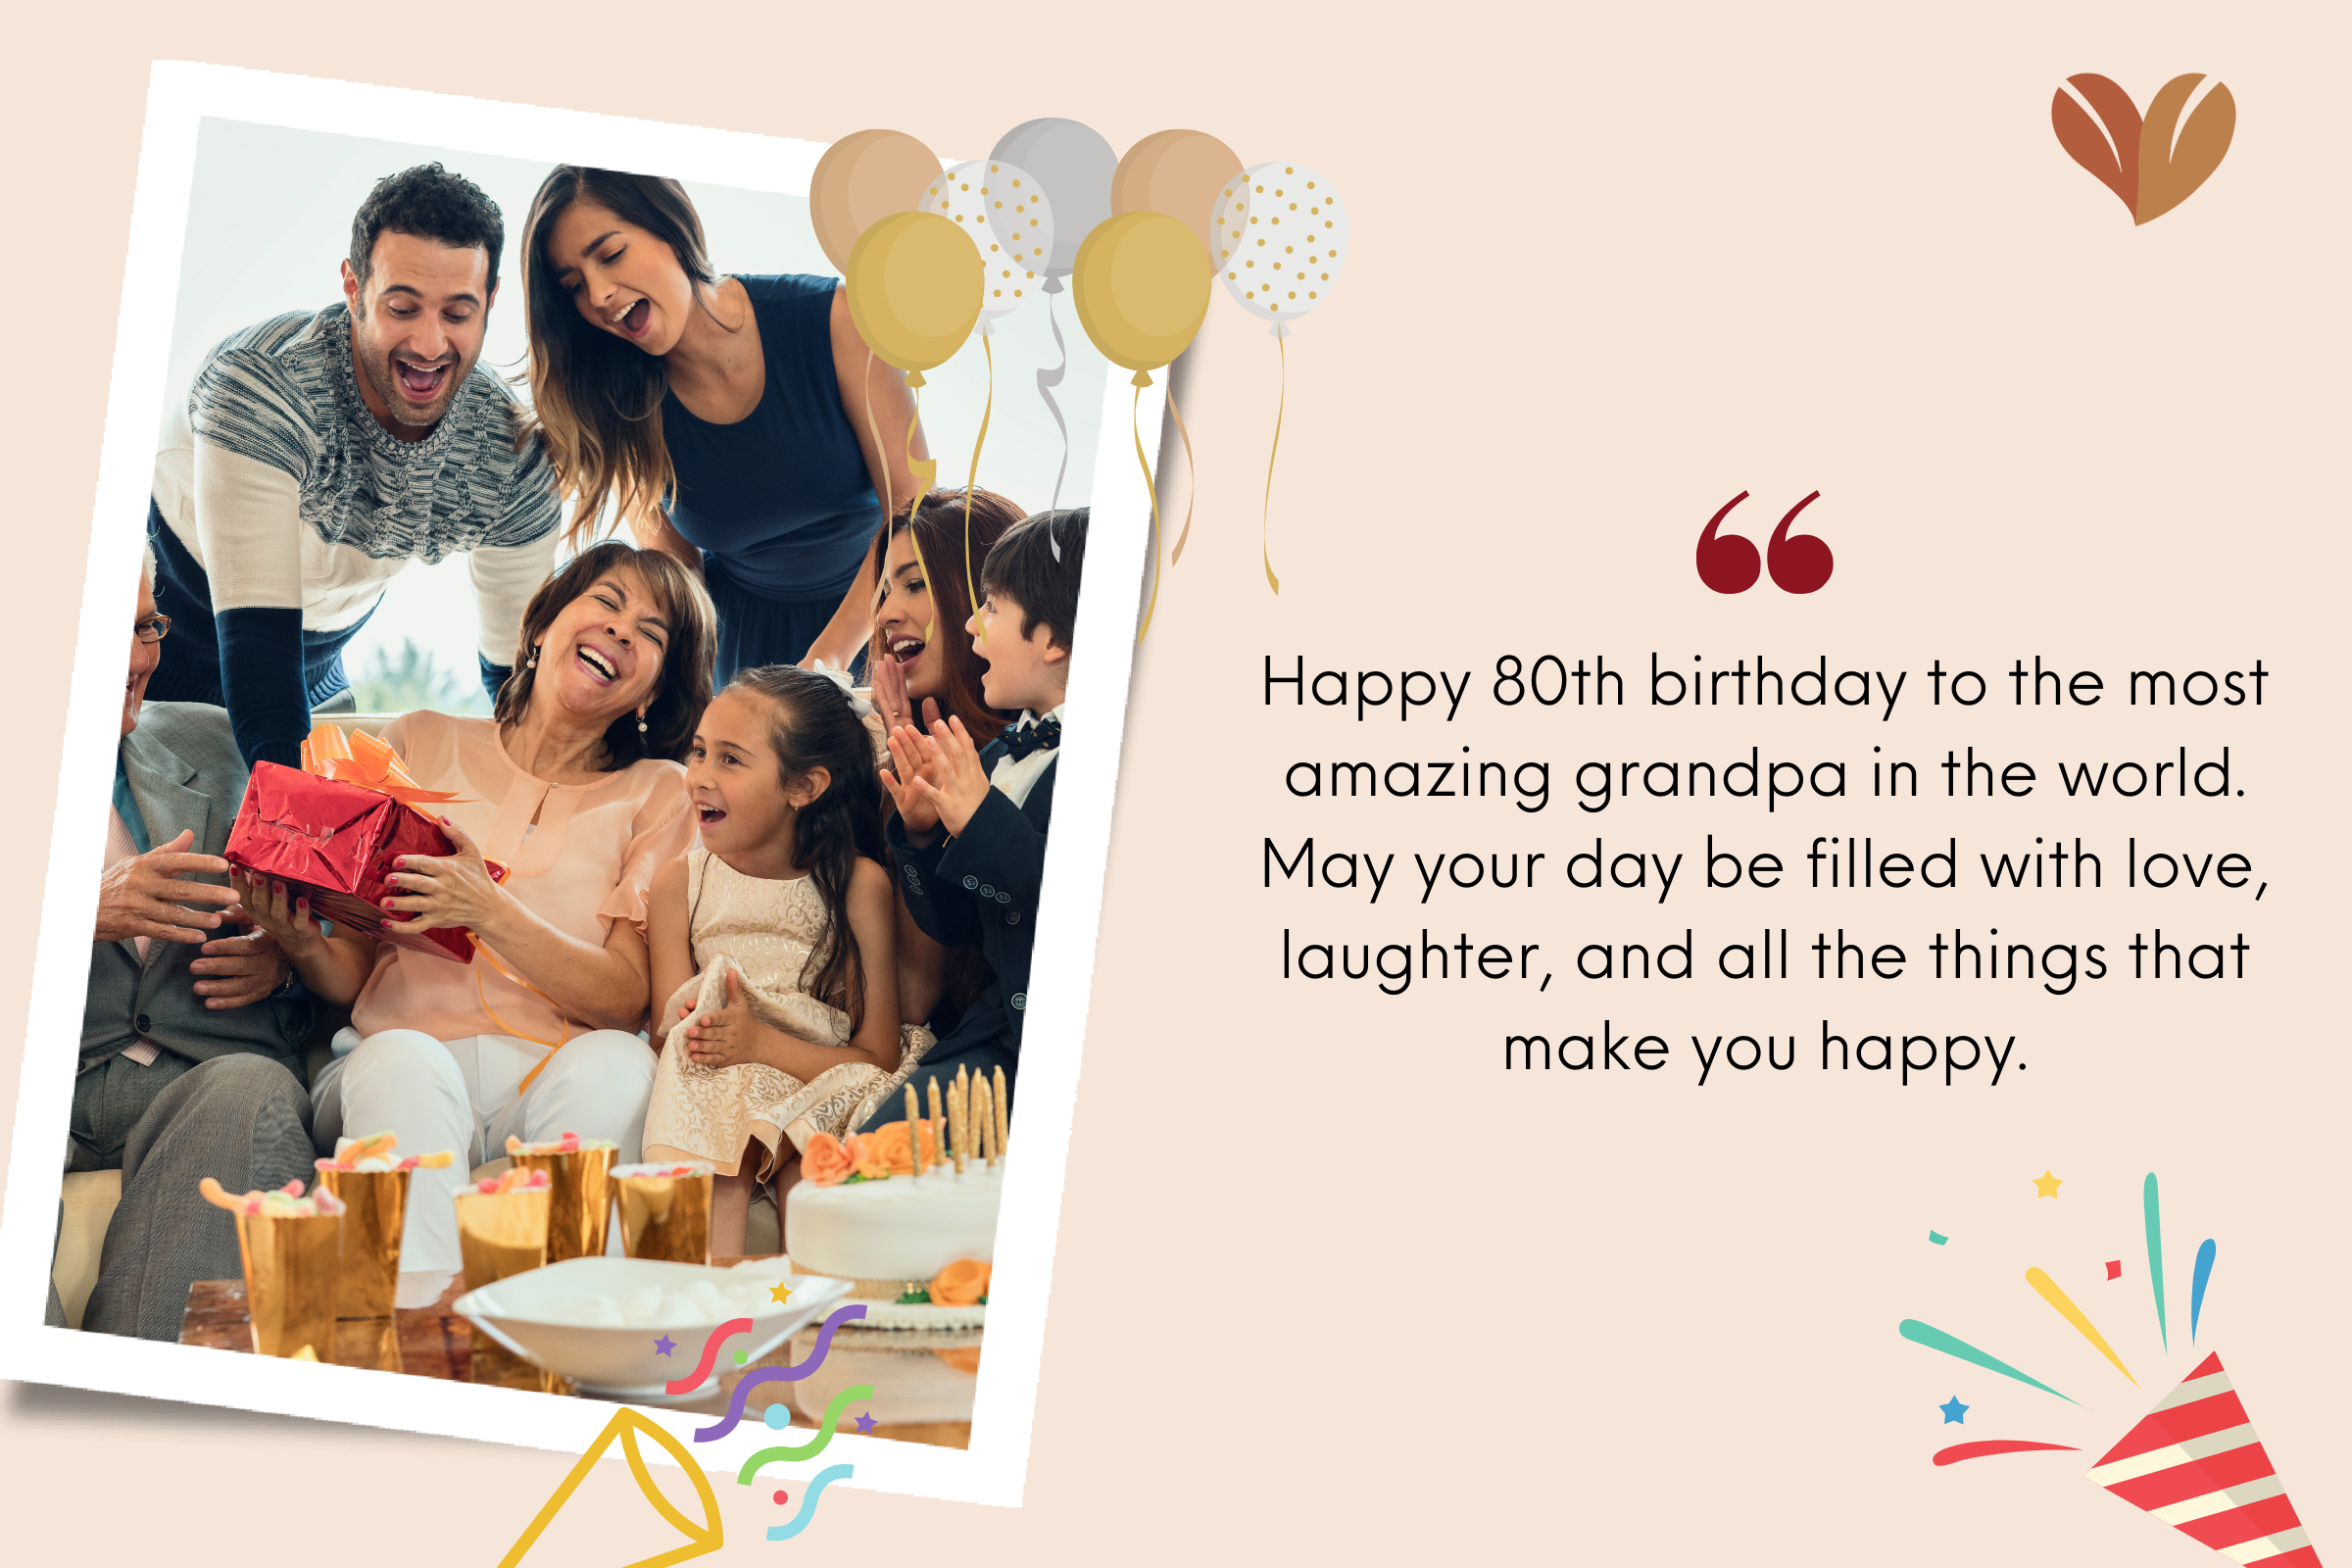 Eight decades of life is a remarkable achievement. Here's to your 80th birthday, filled with happiness and celebrations